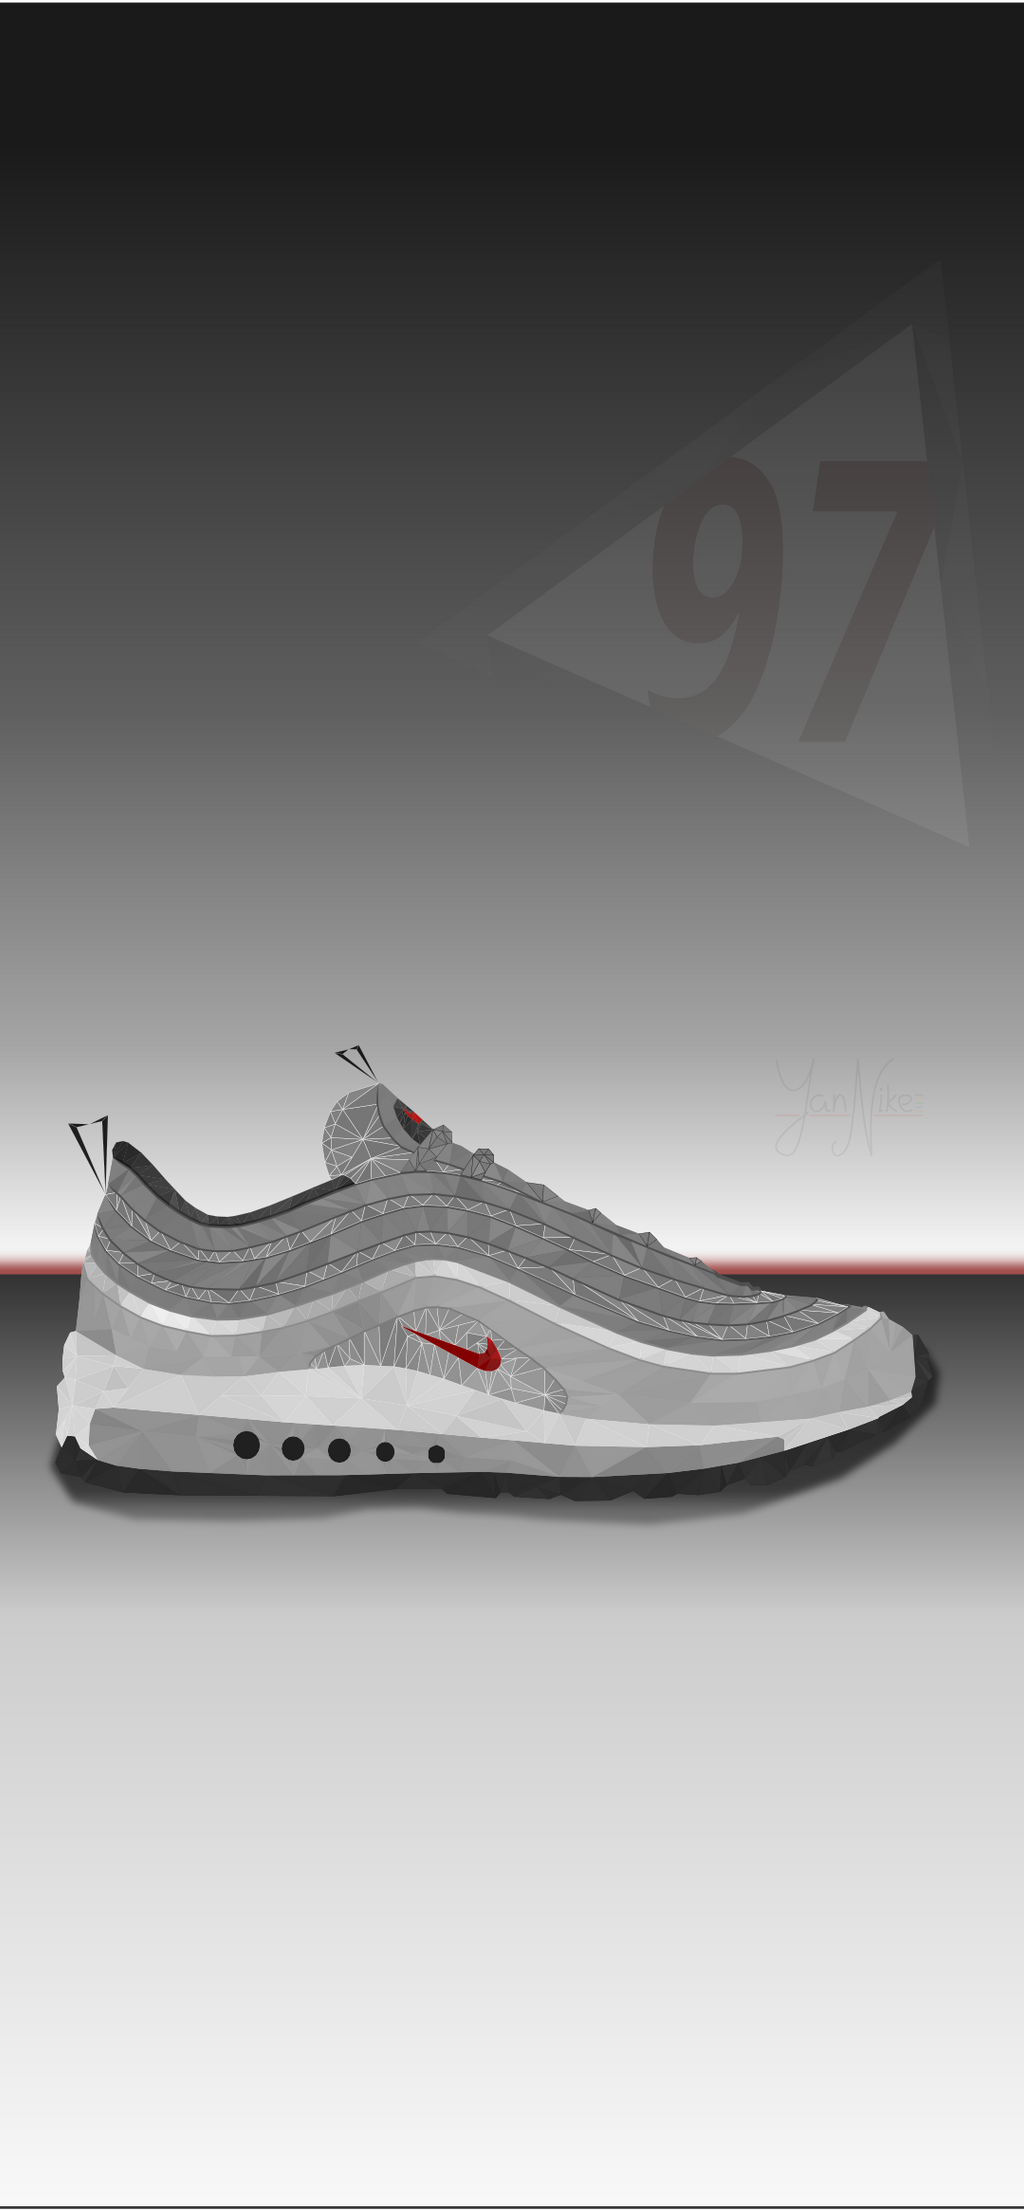 Fractus Airmax 97 Silver mobile wallpaper by on